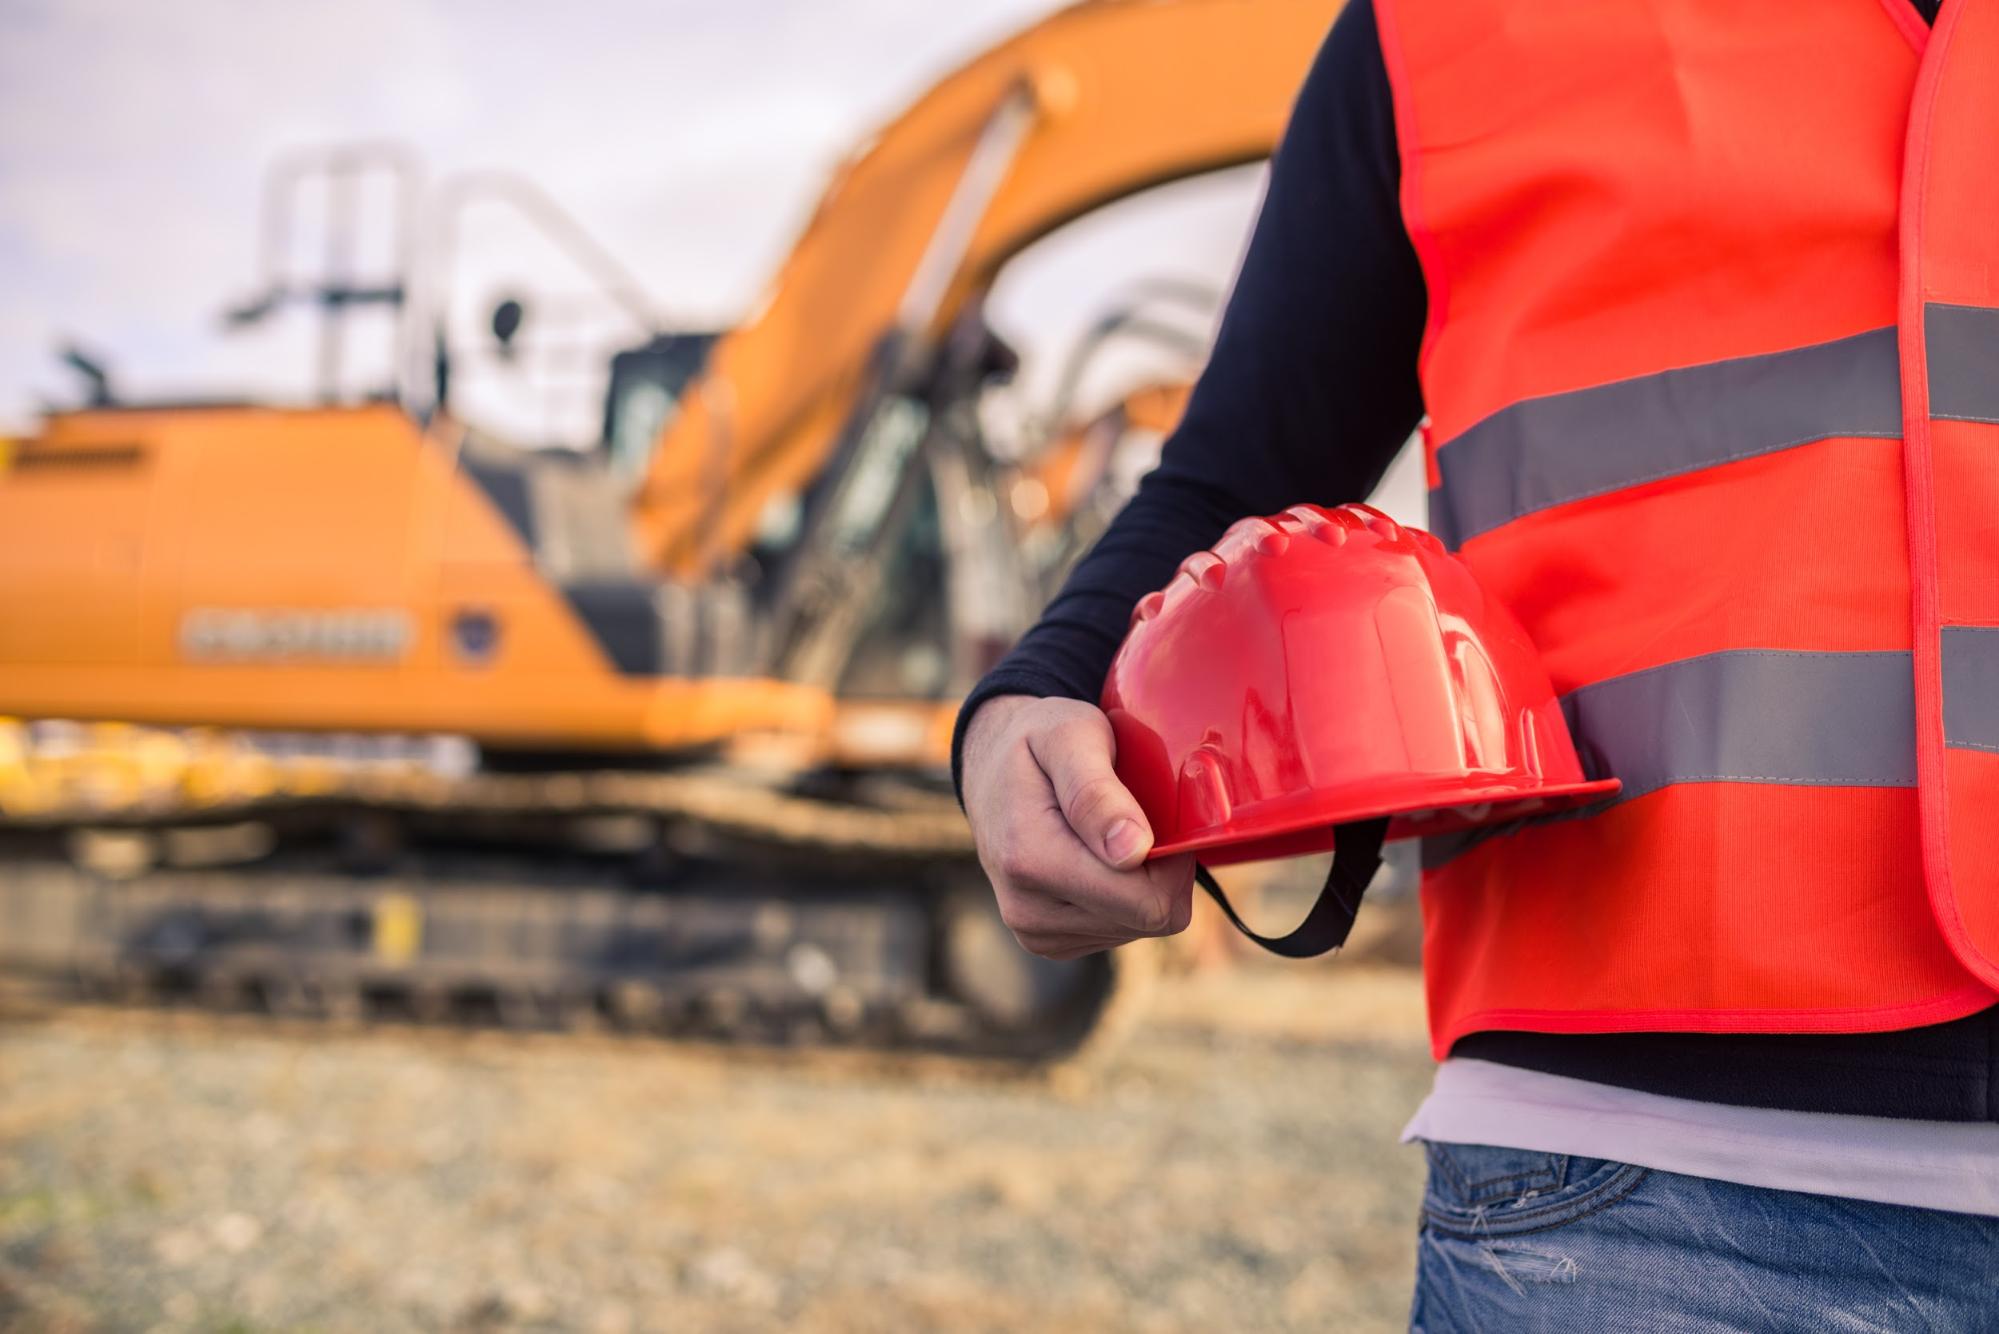 A trader holds a red safety hat with excavator on the background